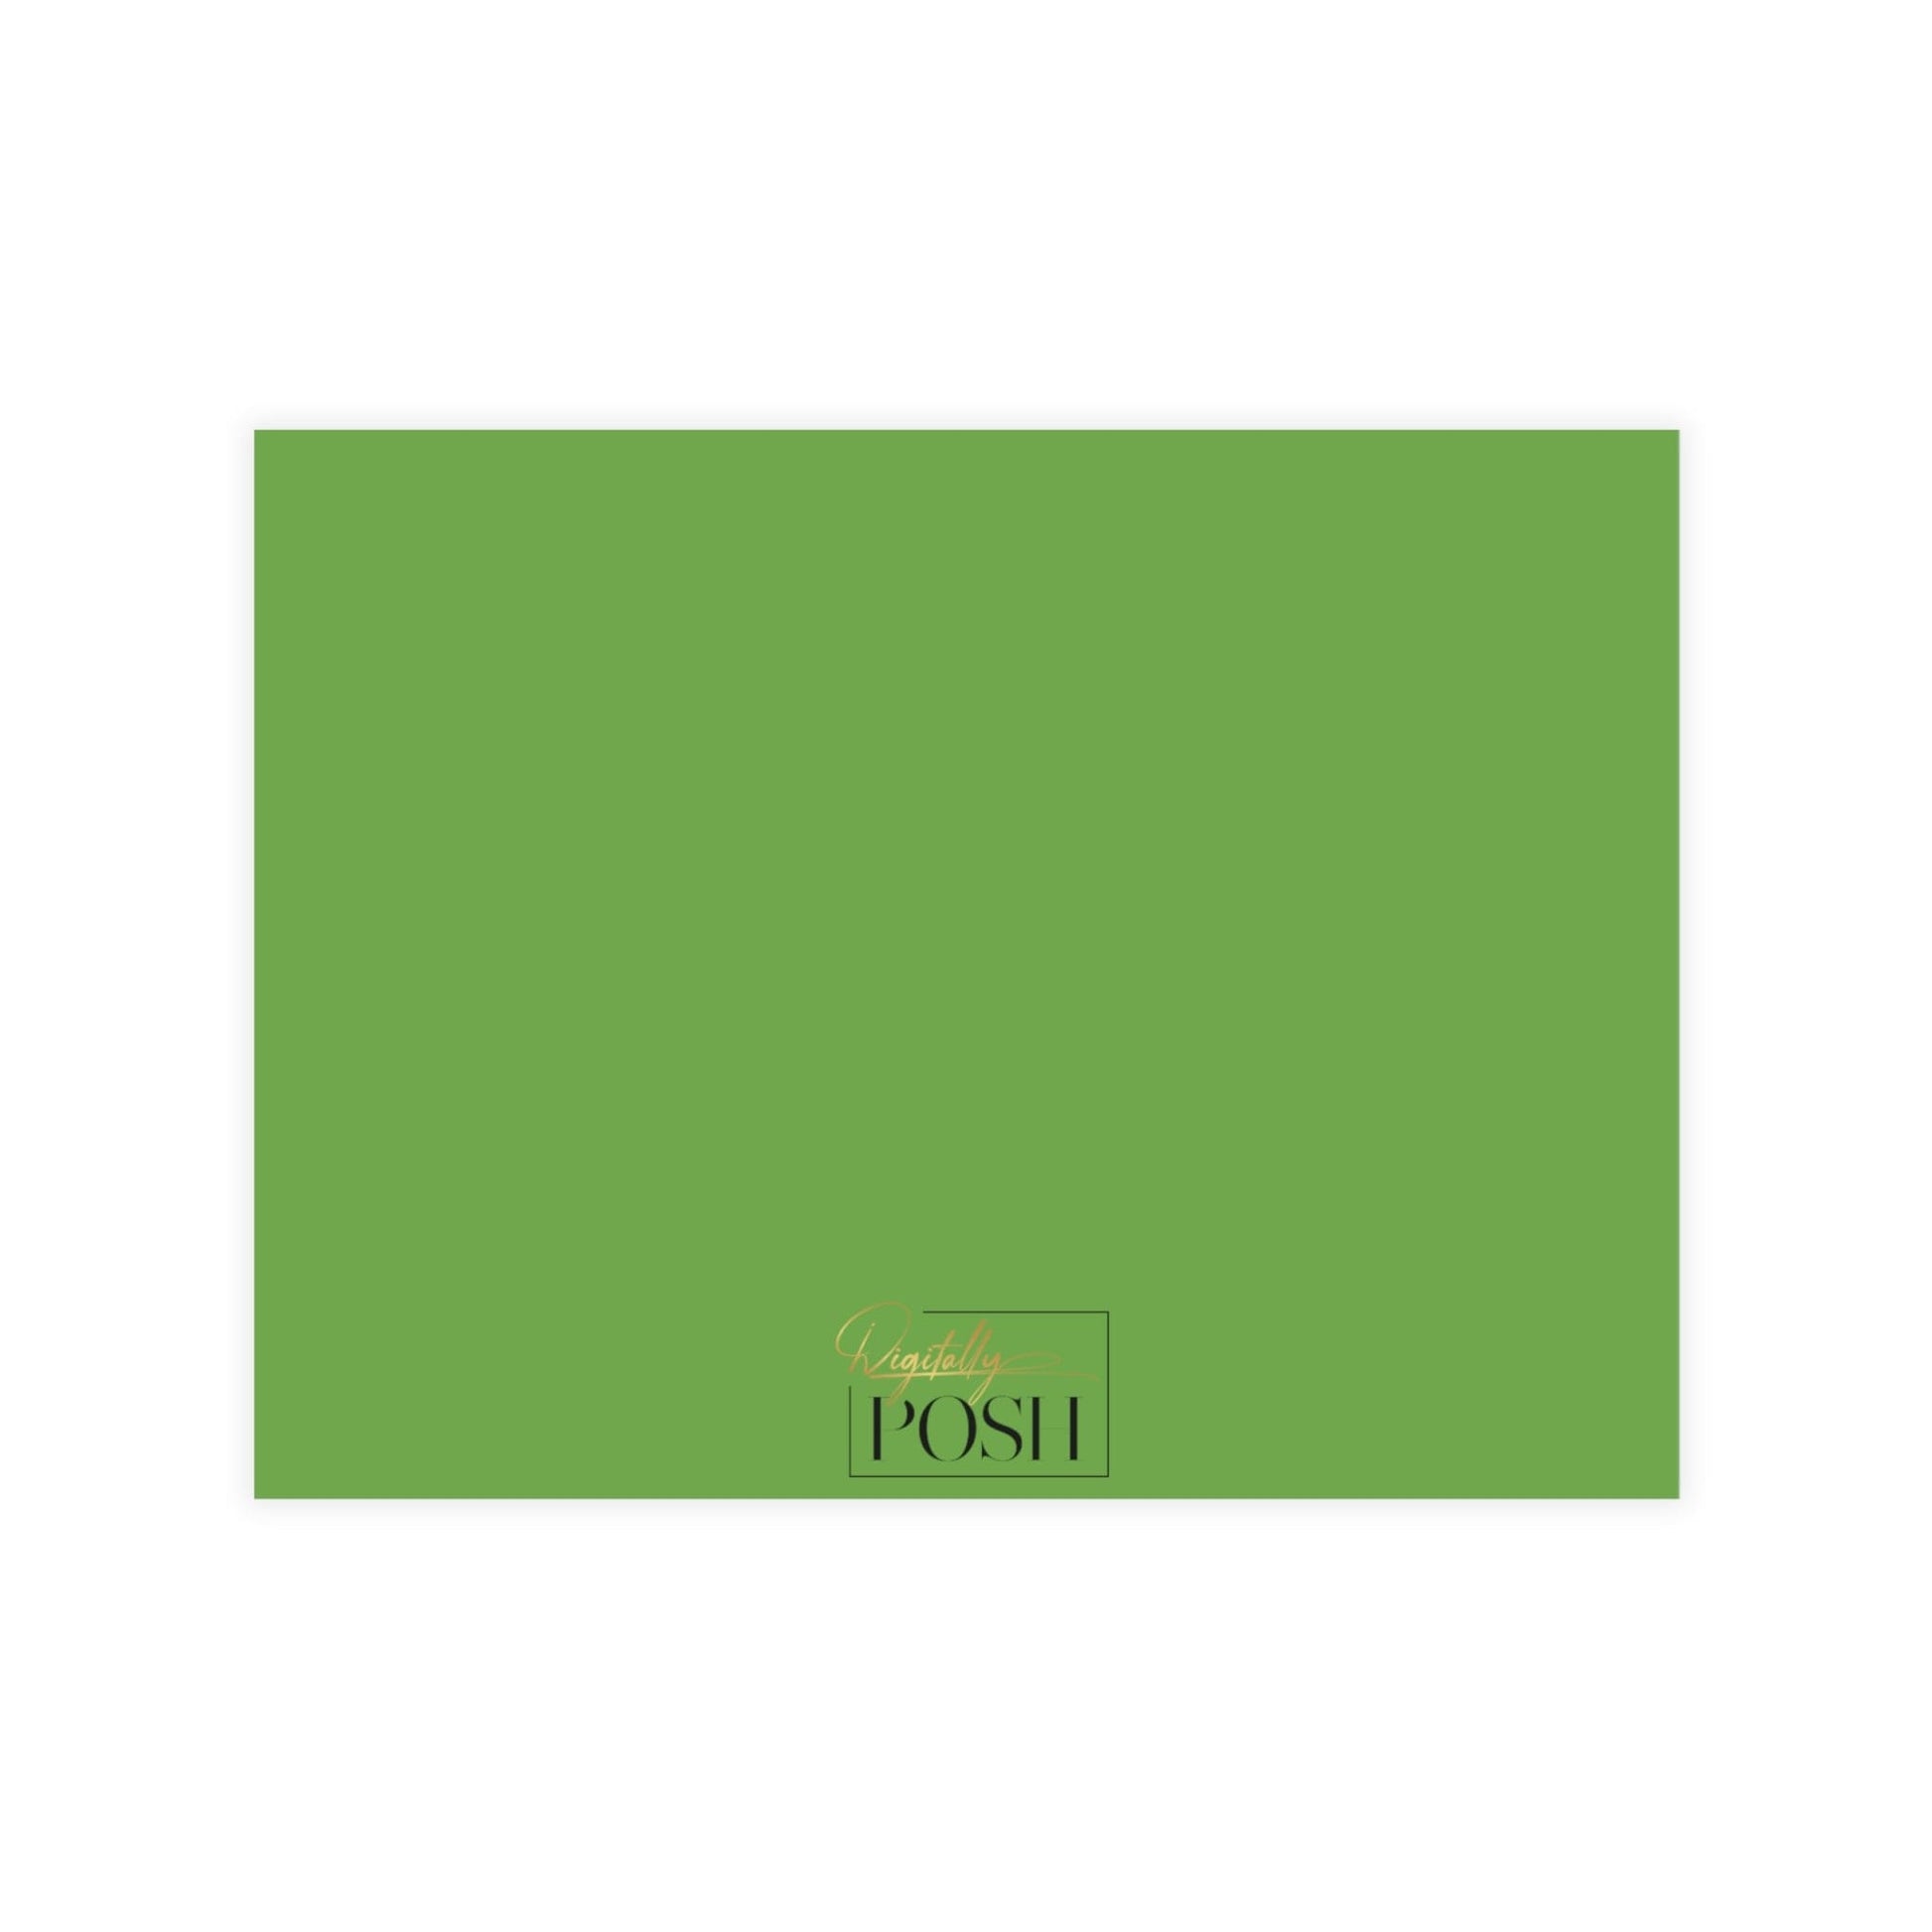 Personalized Note Card: Add a Personal Touch with Customized Stationery for Every Occasion. Green Feathers Notecard